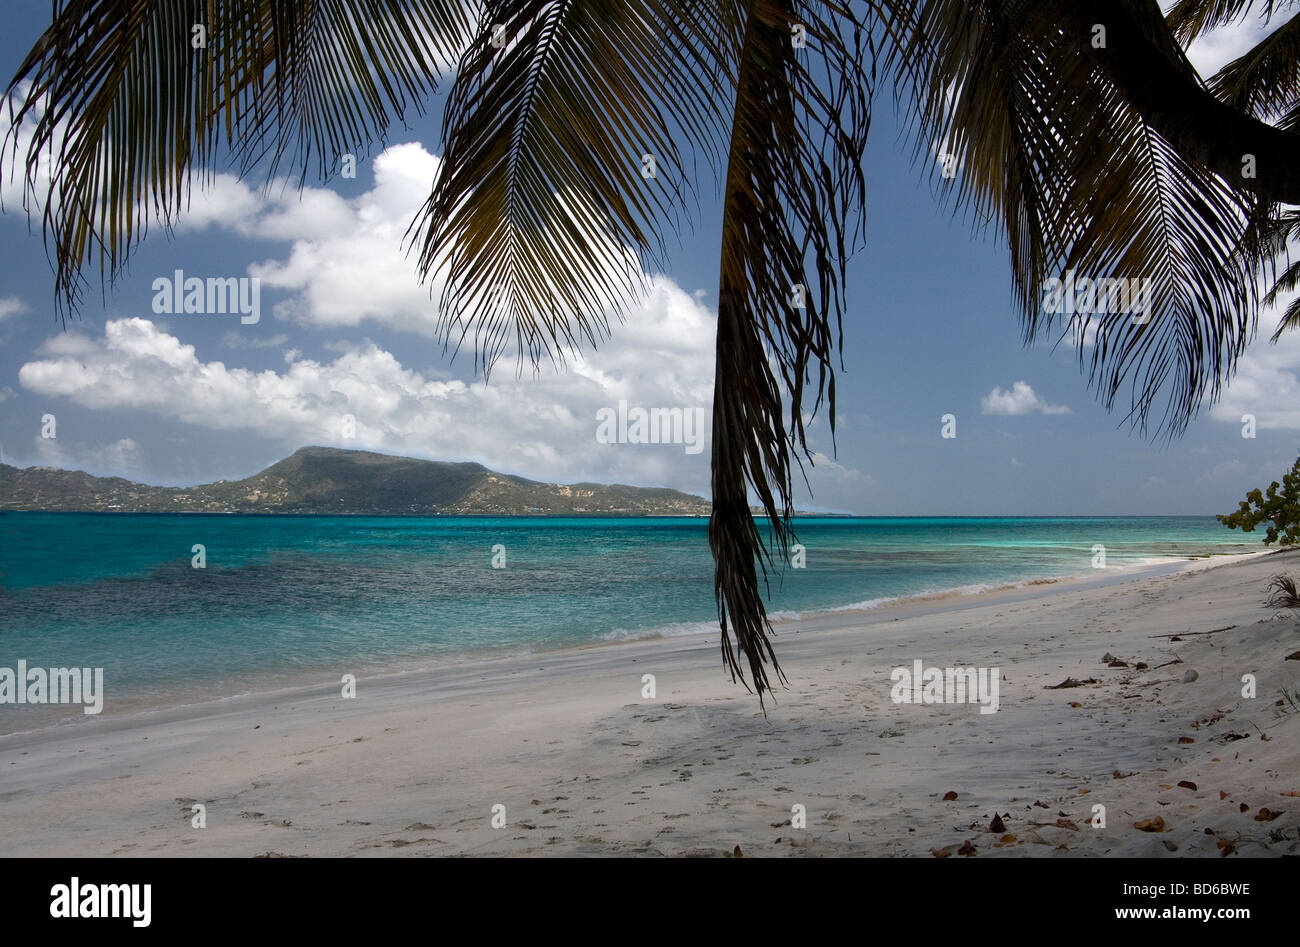 Palm Fronds Over the White Coral Sandy Beach at Petit Saint Vincent, Caribbean with Union Island in the Distance. Stock Photo